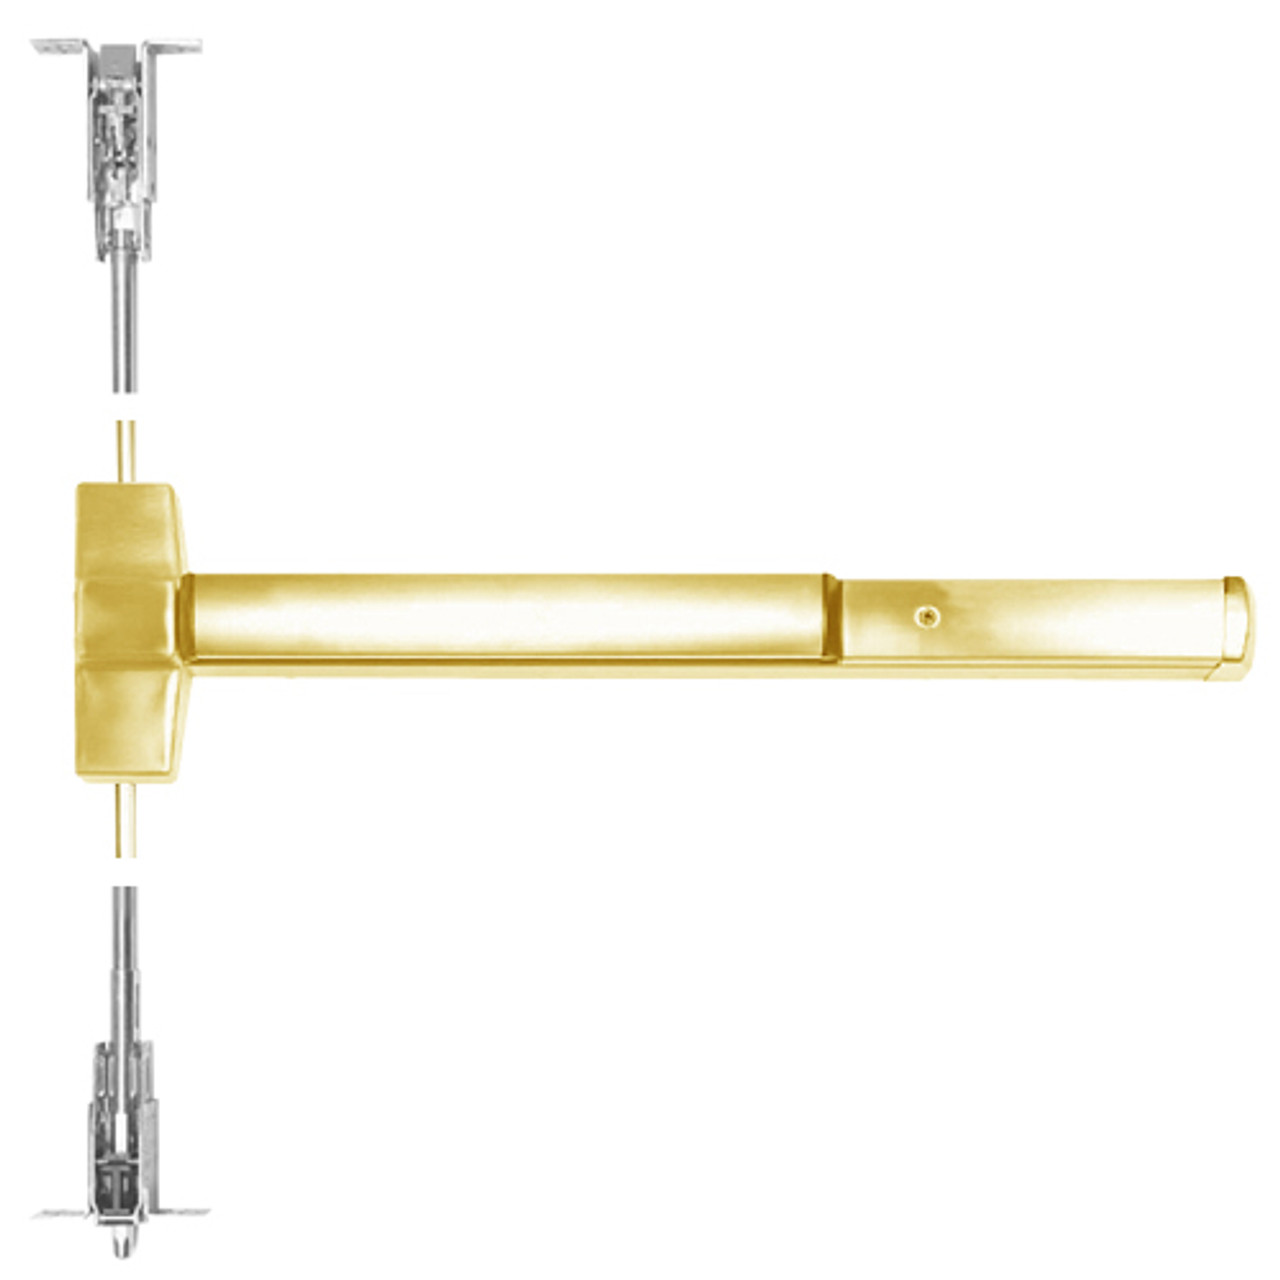 ED5860-605-M61 Corbin ED5800 Series Non Fire Rated Concealed Vertical Rod Device with Exit Alarm Device in Bright Brass Finish